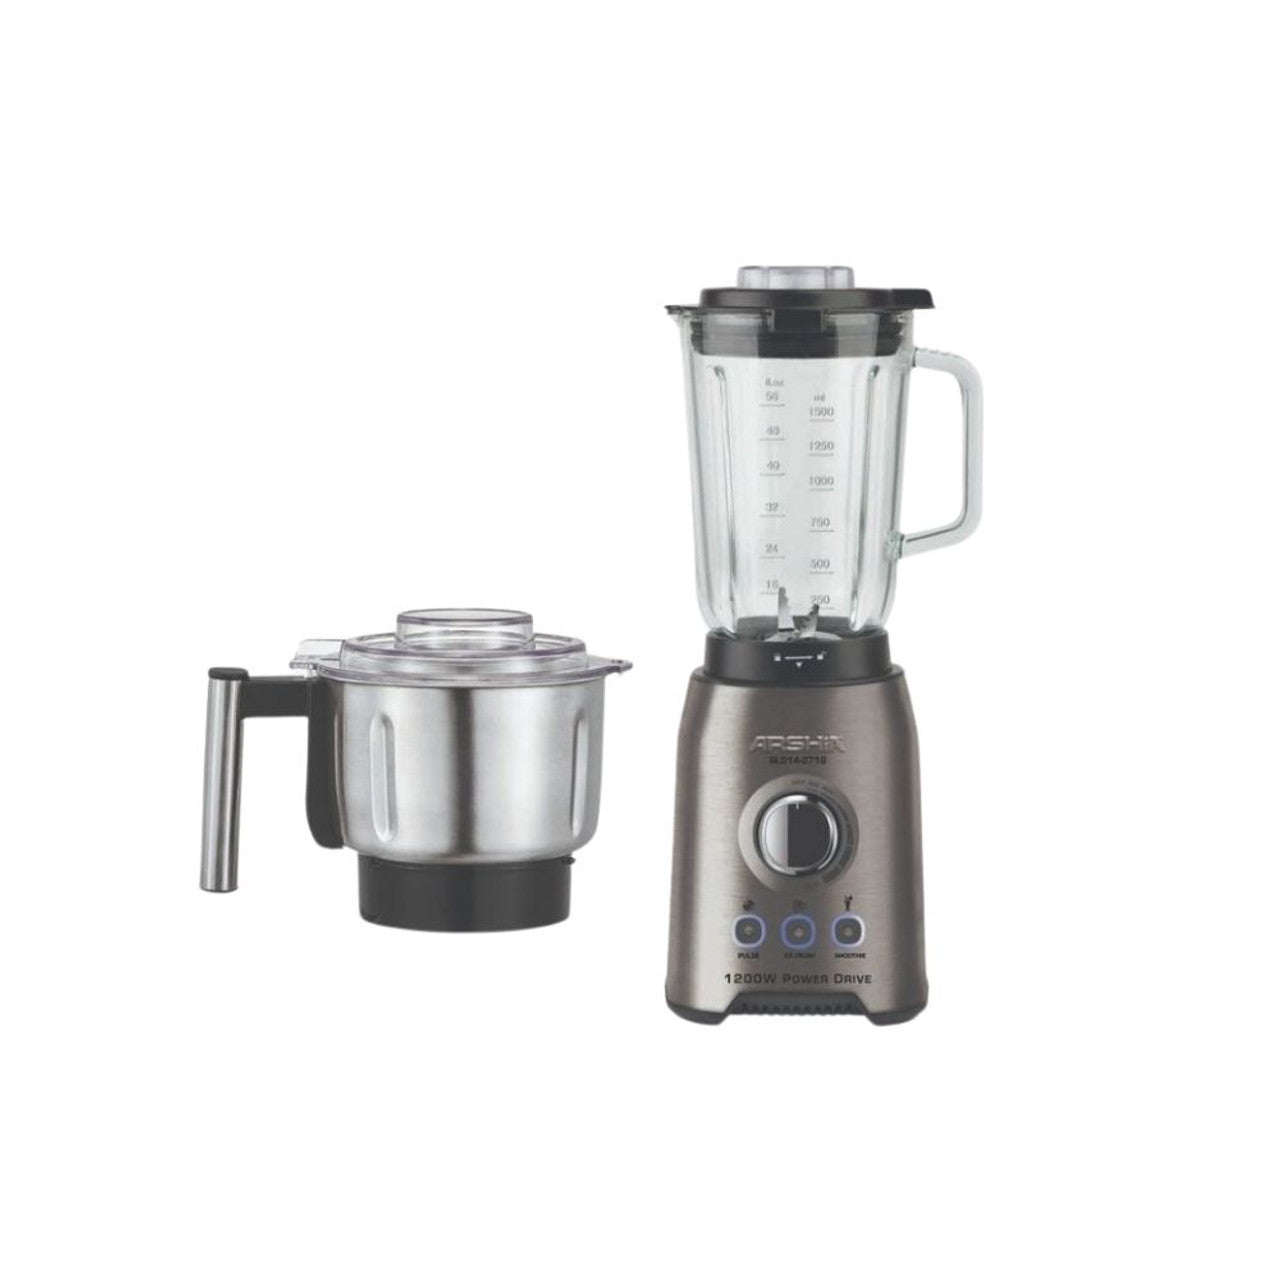 Arshia Premium Table Blender With Glass Jar And Grinder , 1200W